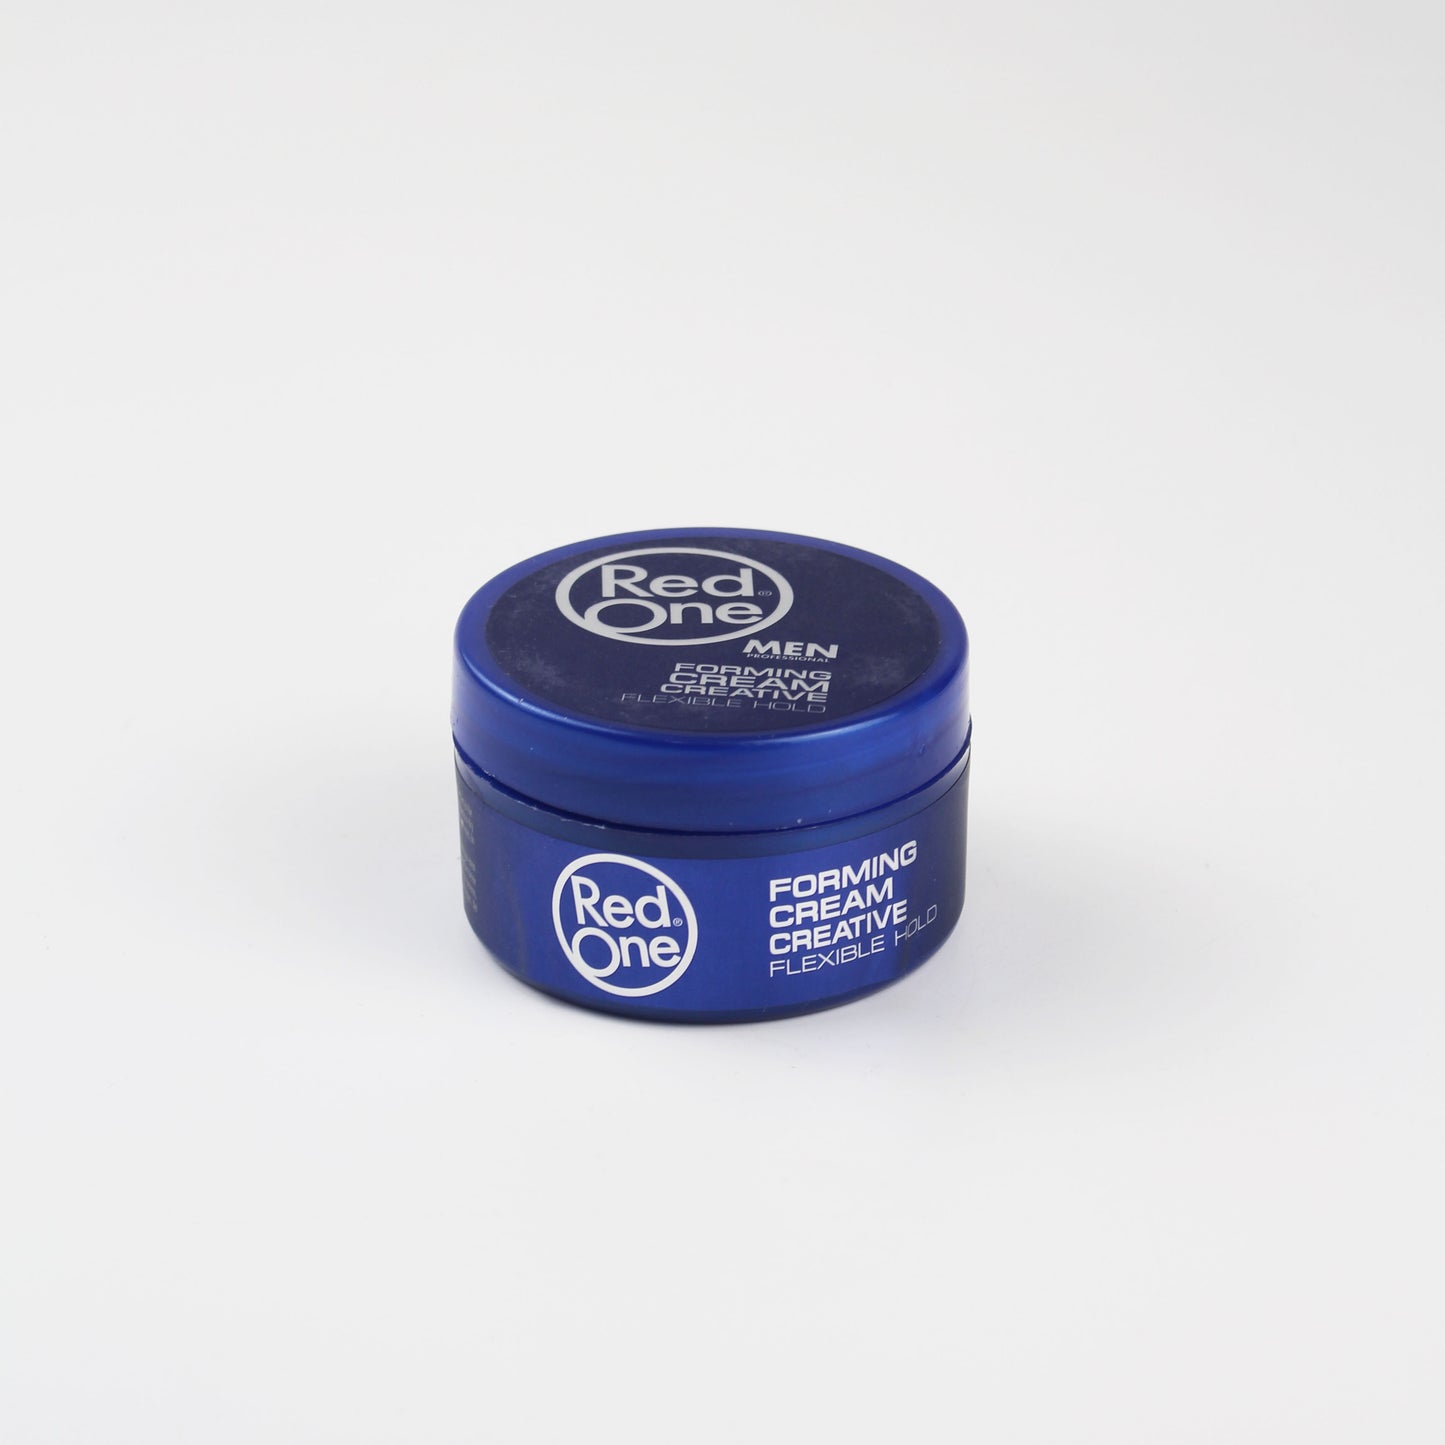 Red One - FORMING CREAM CREATIVE-FLEXIBLE HOLD-BLUE